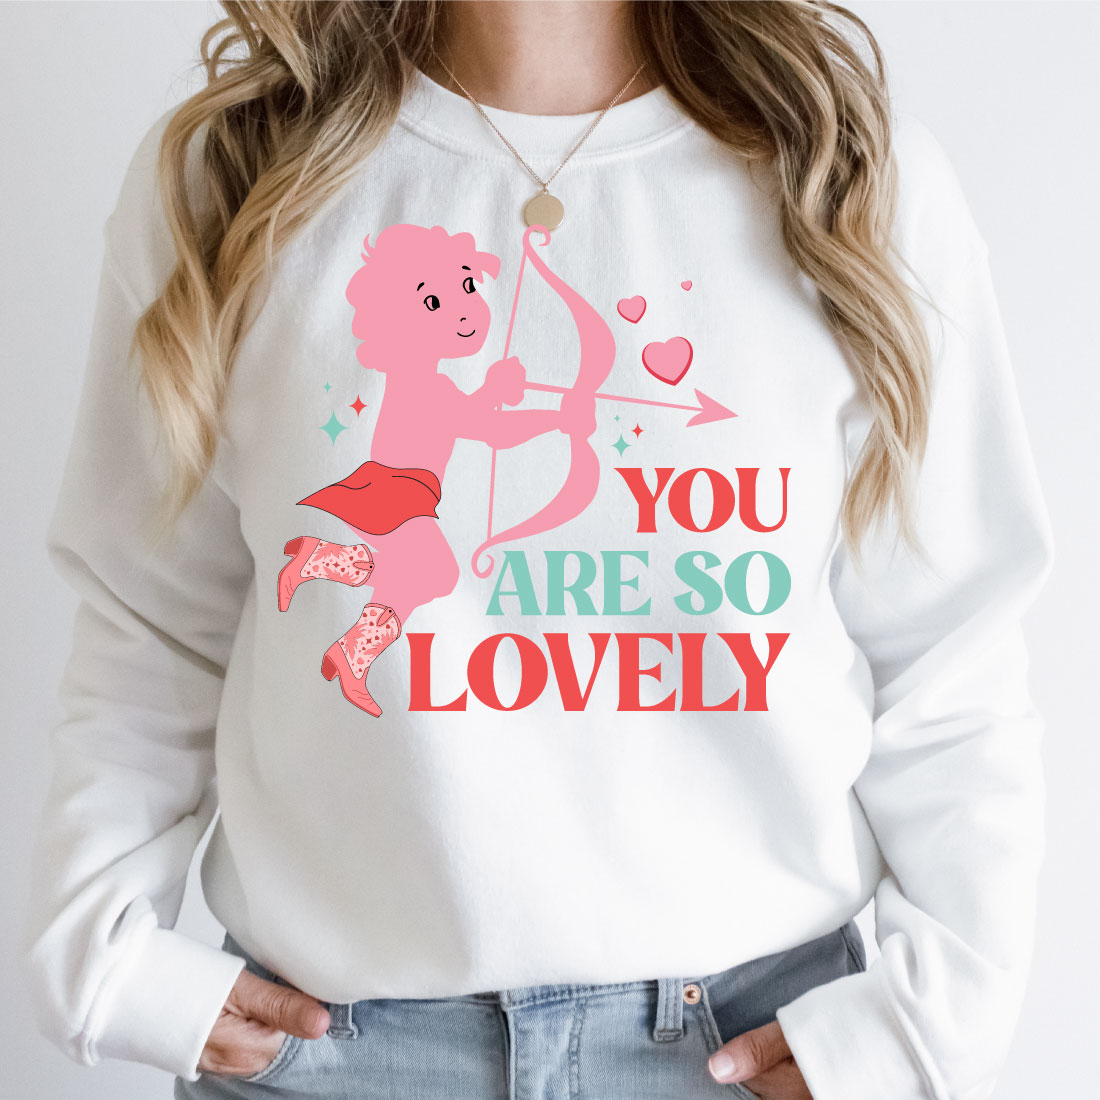 Image of a sweatshirt with an enchanting cupid print